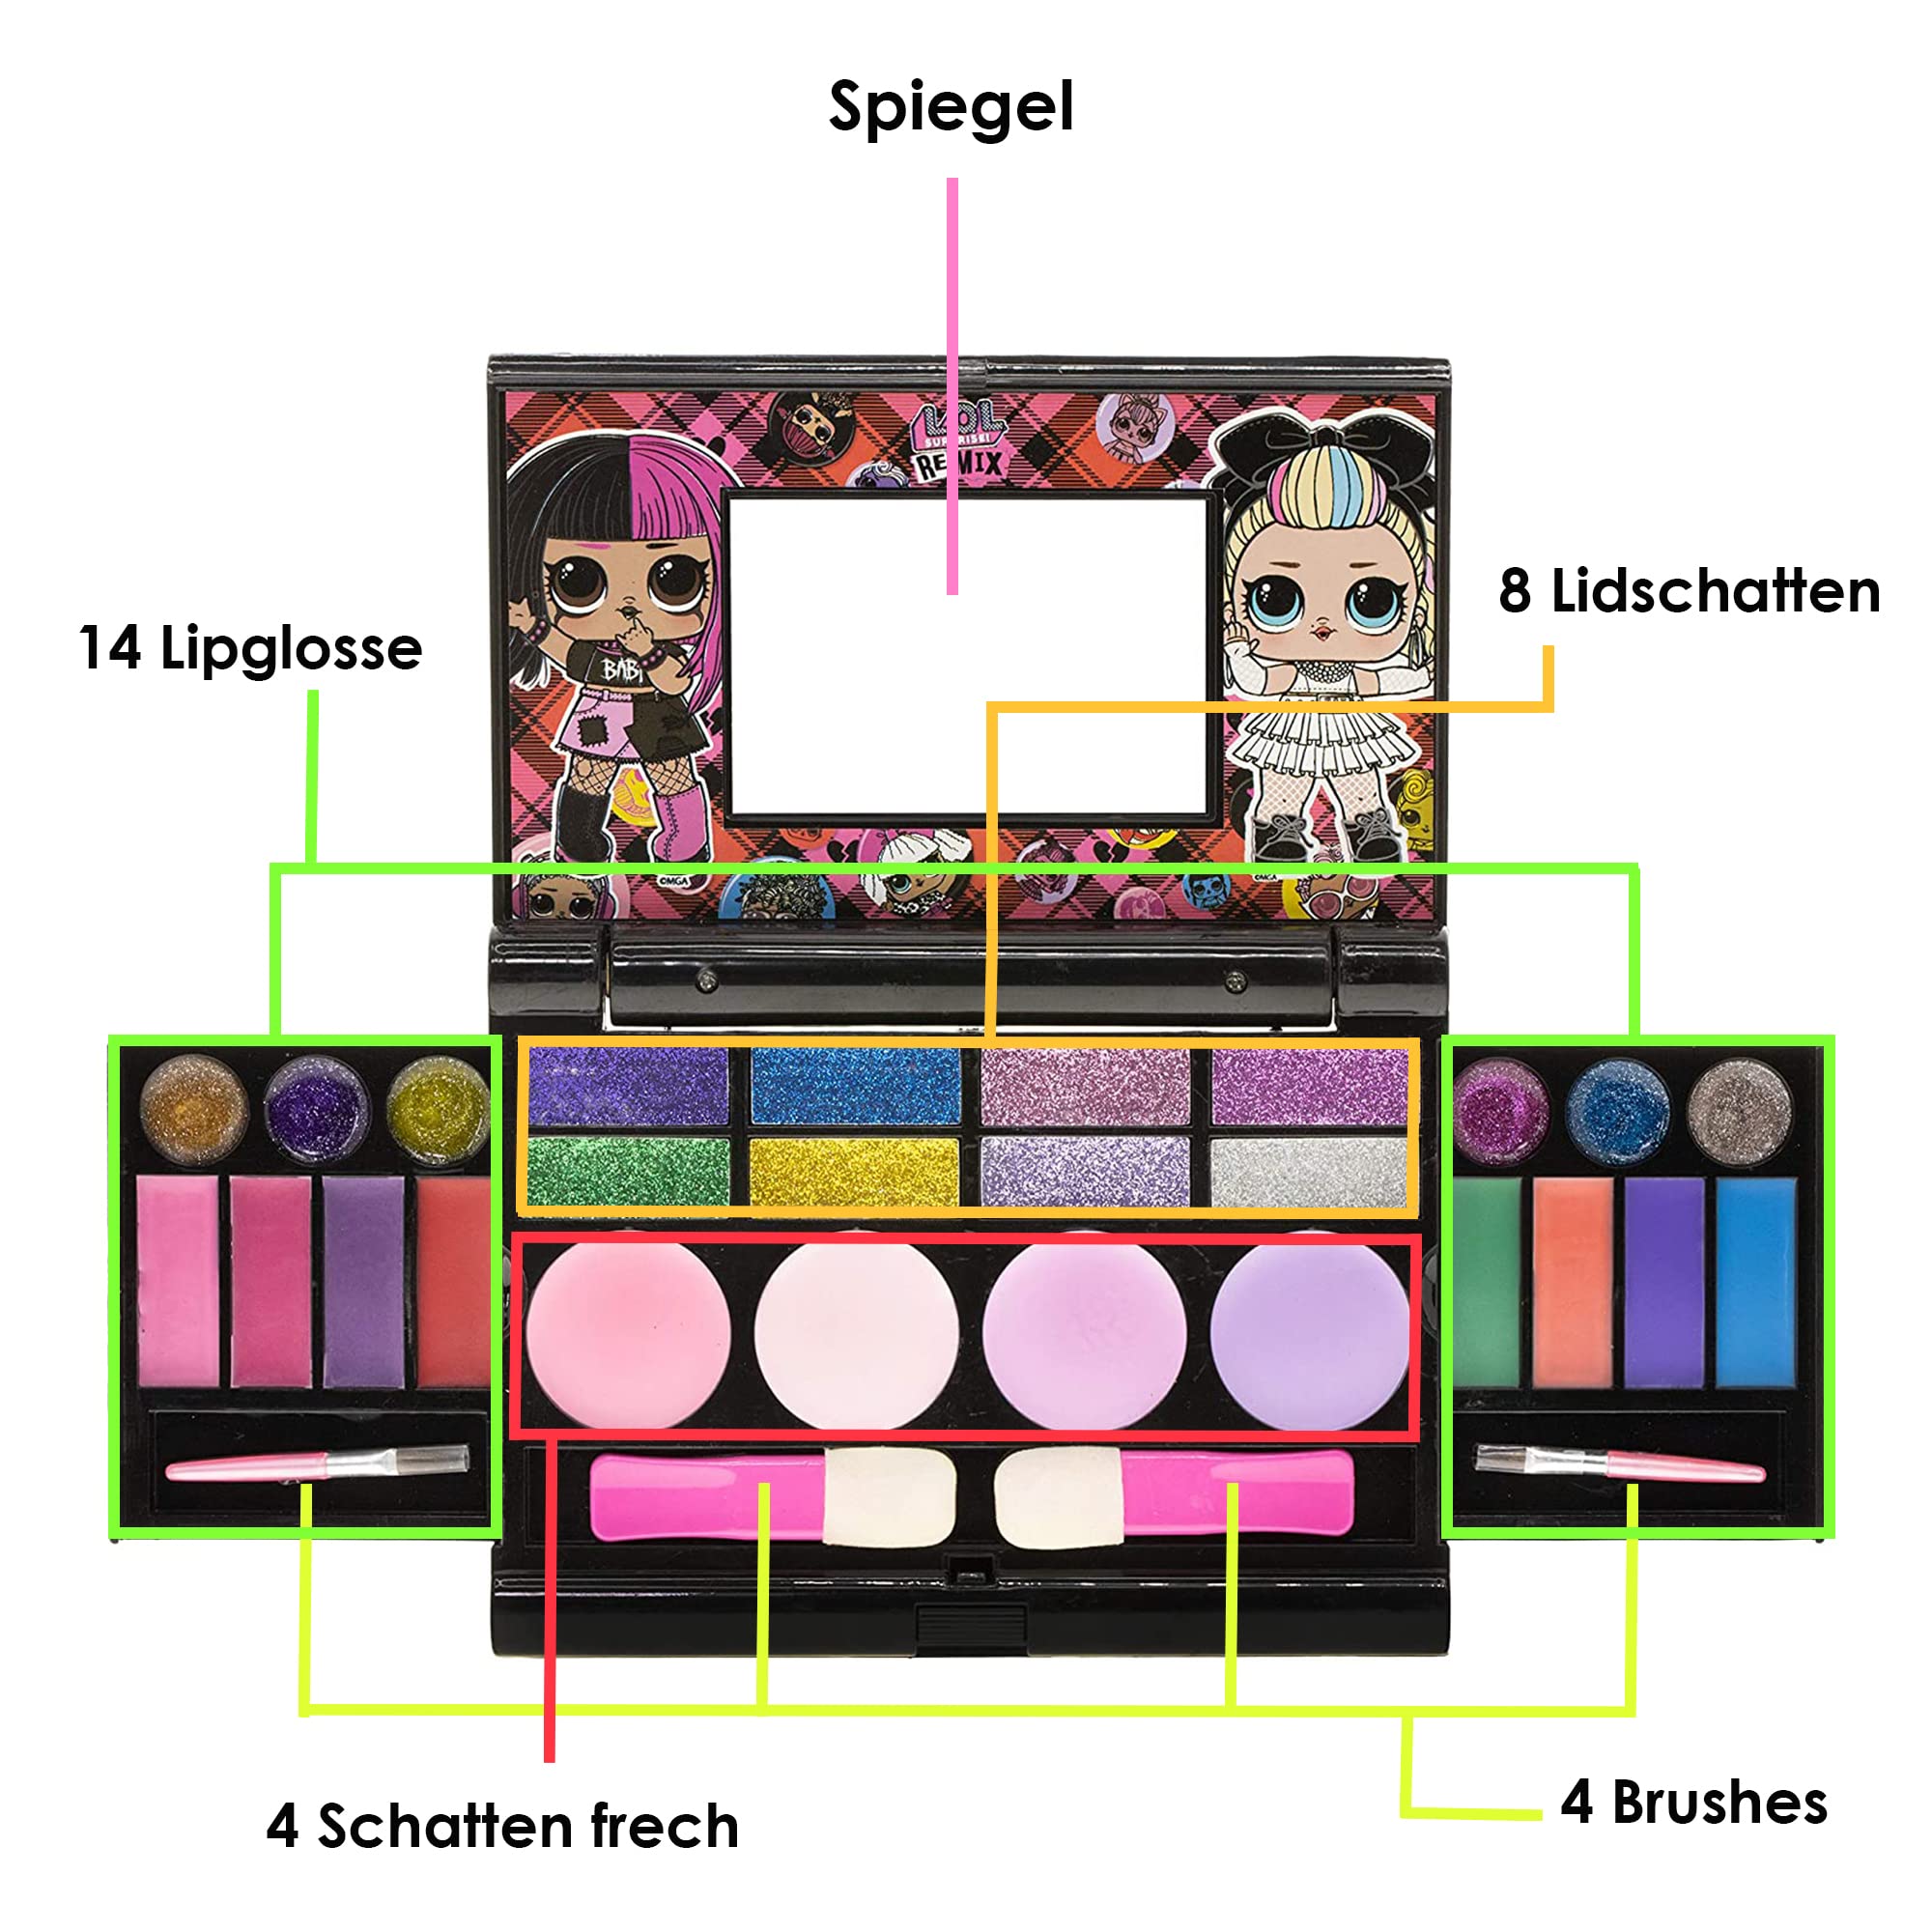 Lol Surprise Townley Girl Train Case Cosmetic Makeup Set for Perfect Kids  Girls